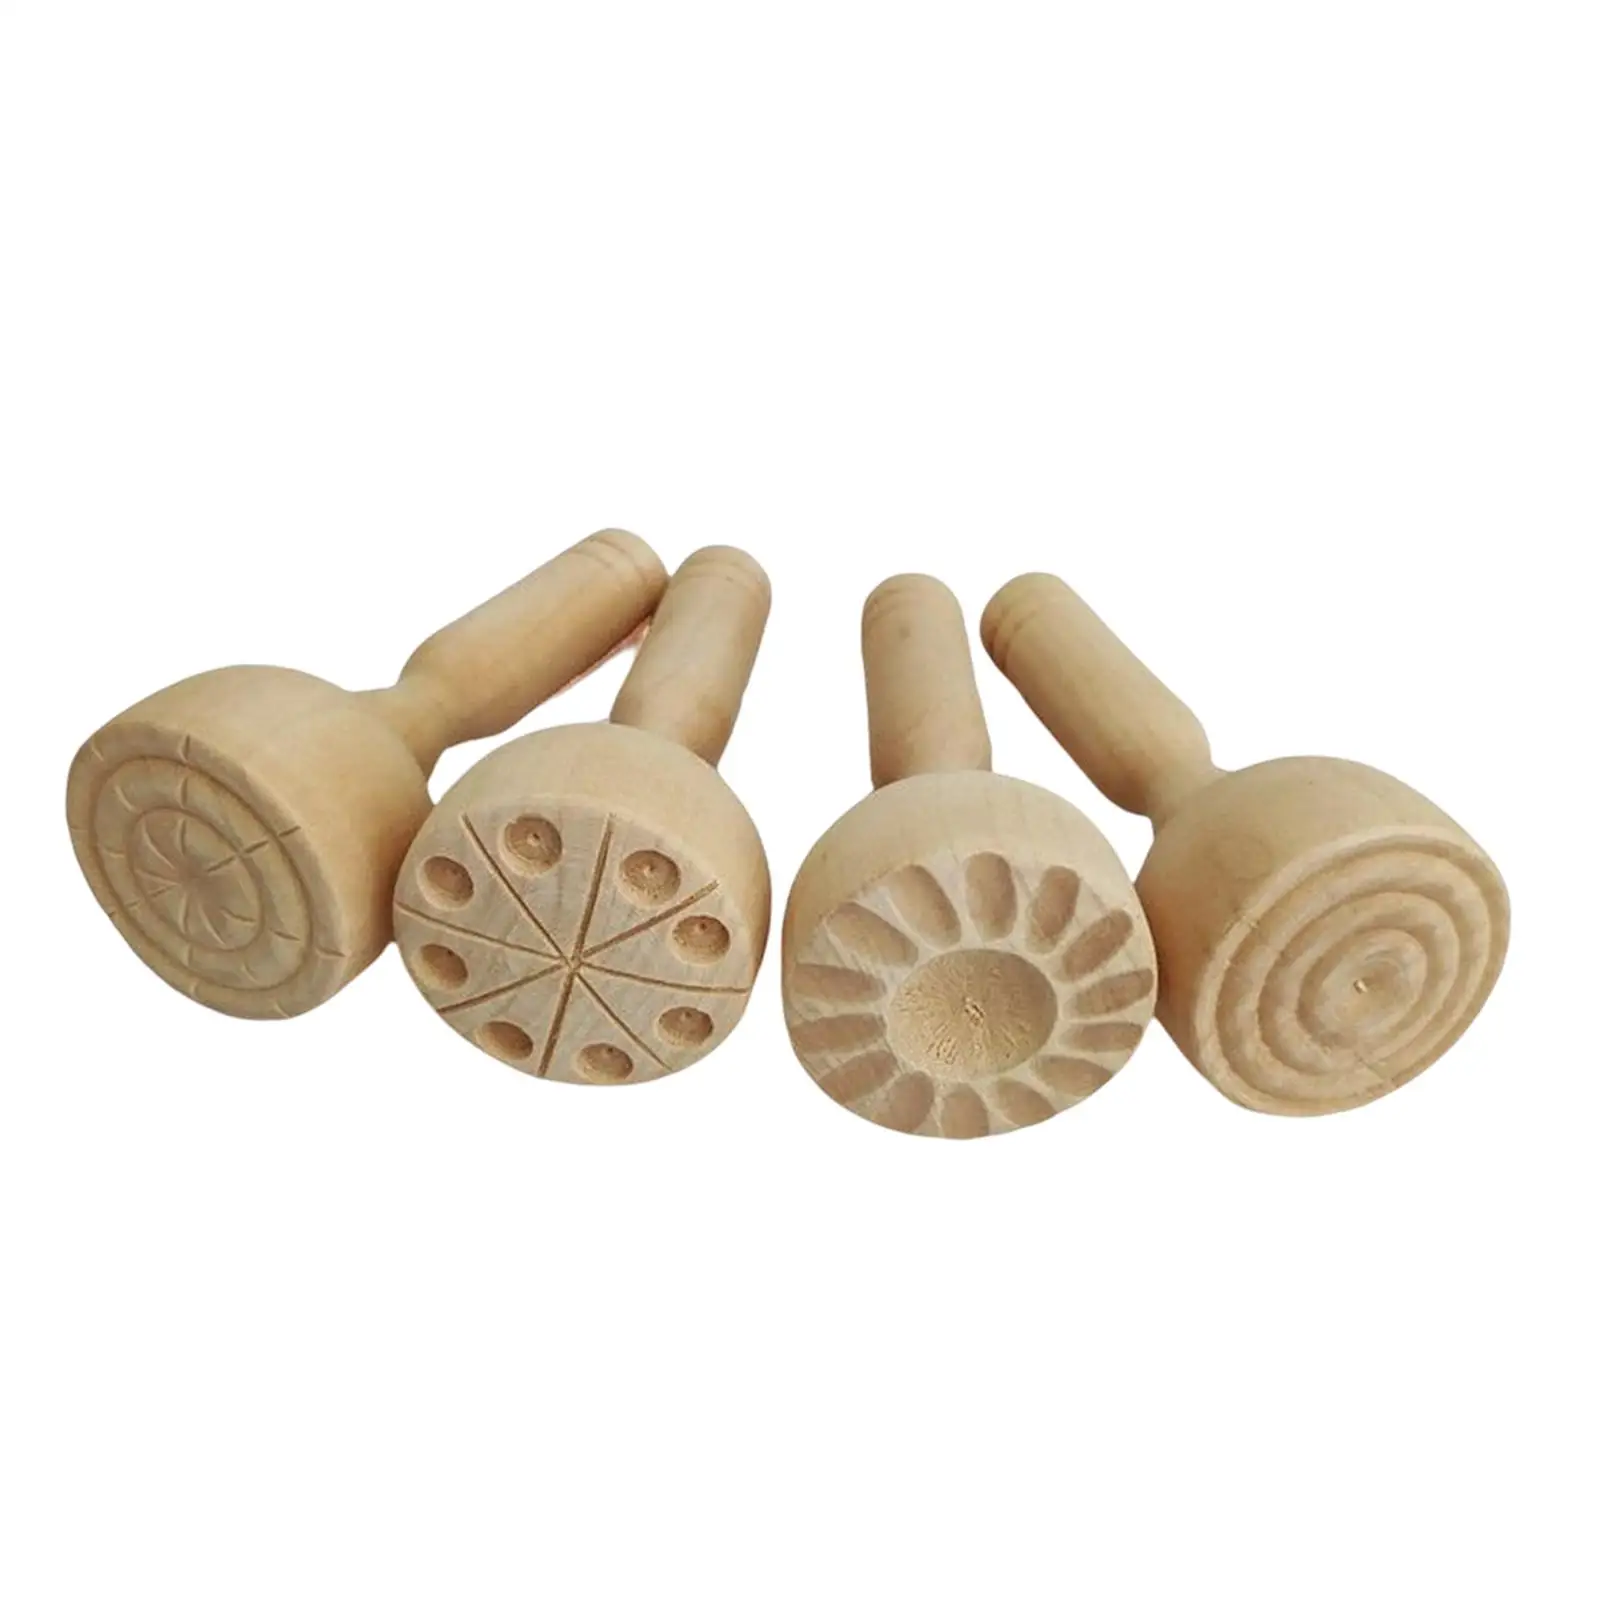 4x Traditional Wooden seal Making Molds DIY Decoration Press Molds Tools for Activity Supplies Toddler Art Craft Child